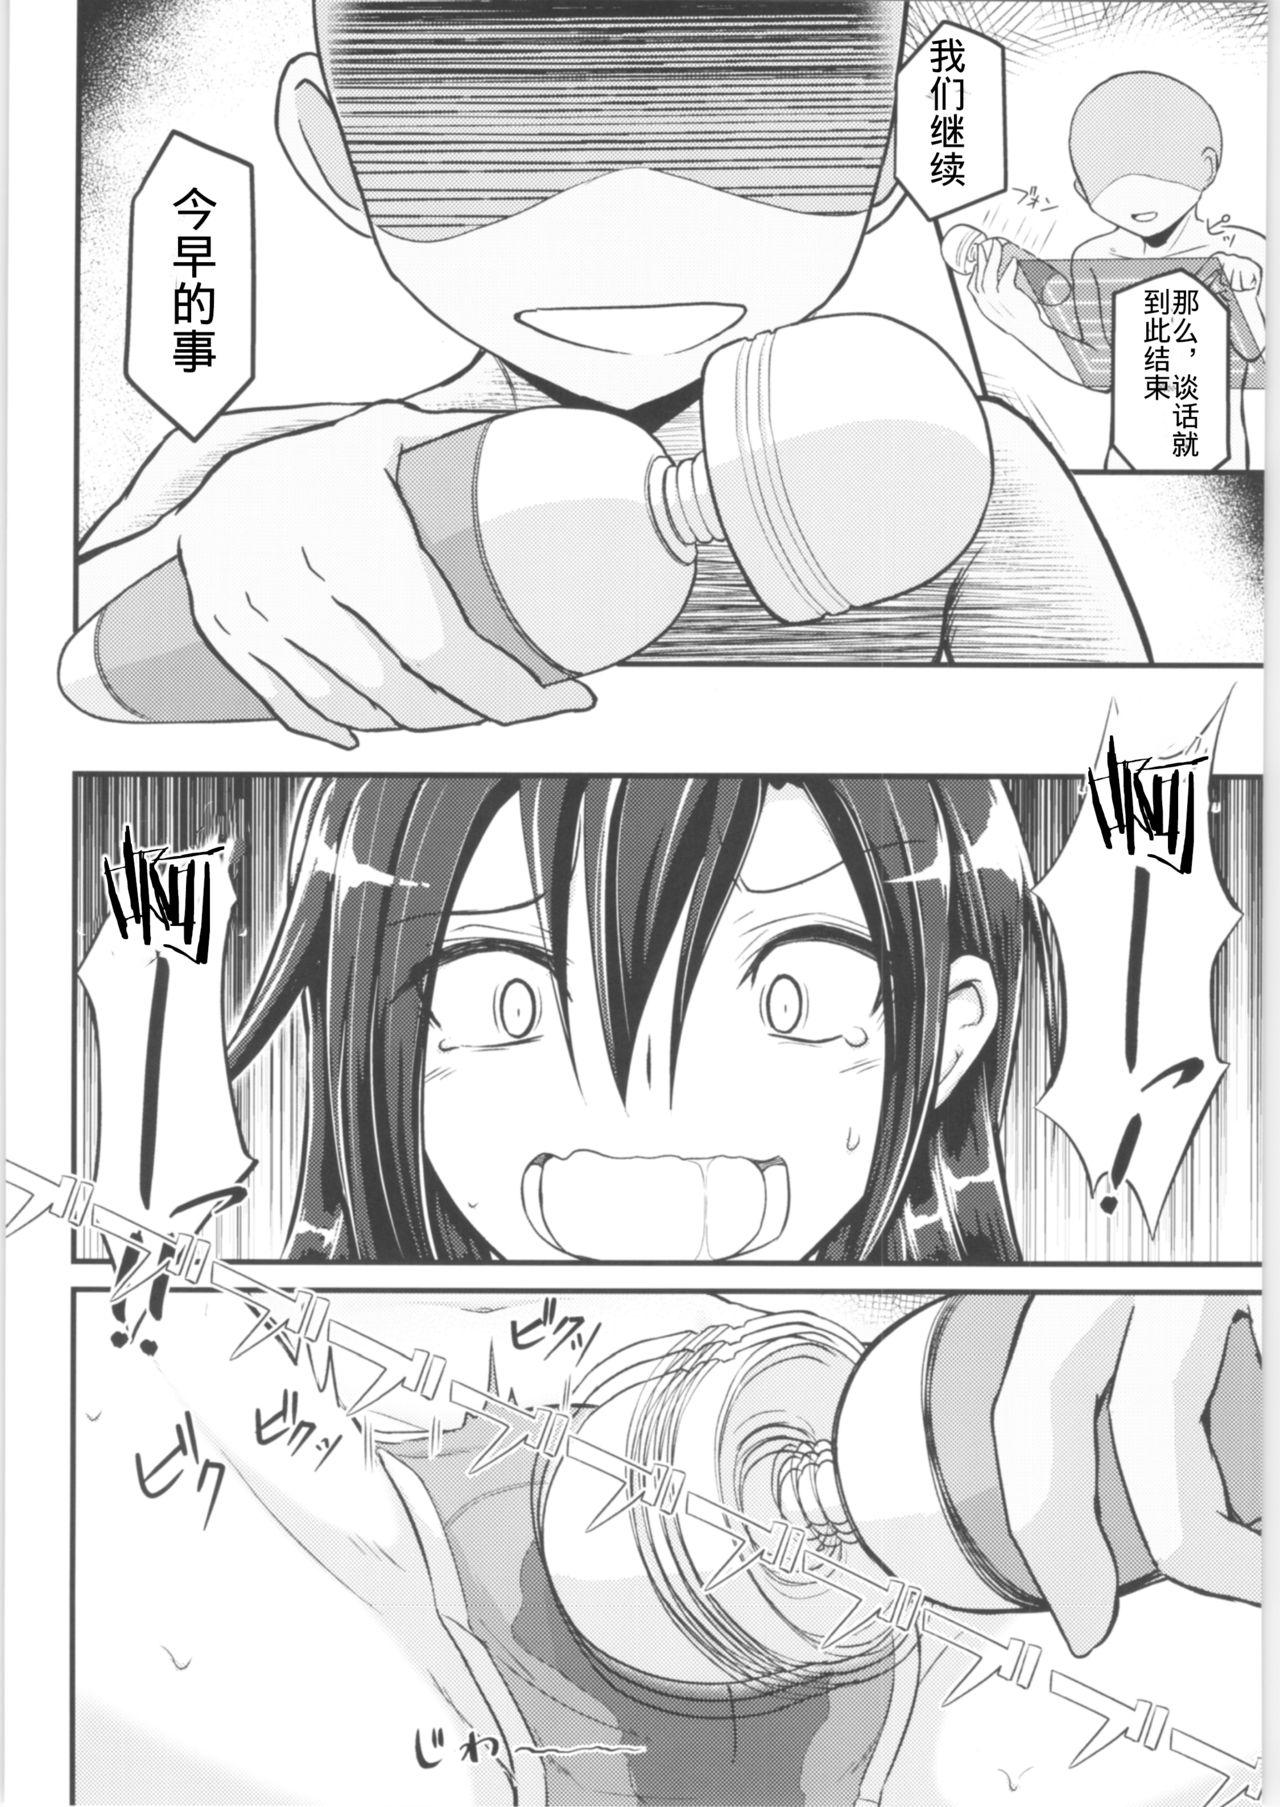 Gay Pornstar Kiriko Route Another #01 - Sword art online Stretch - Page 9